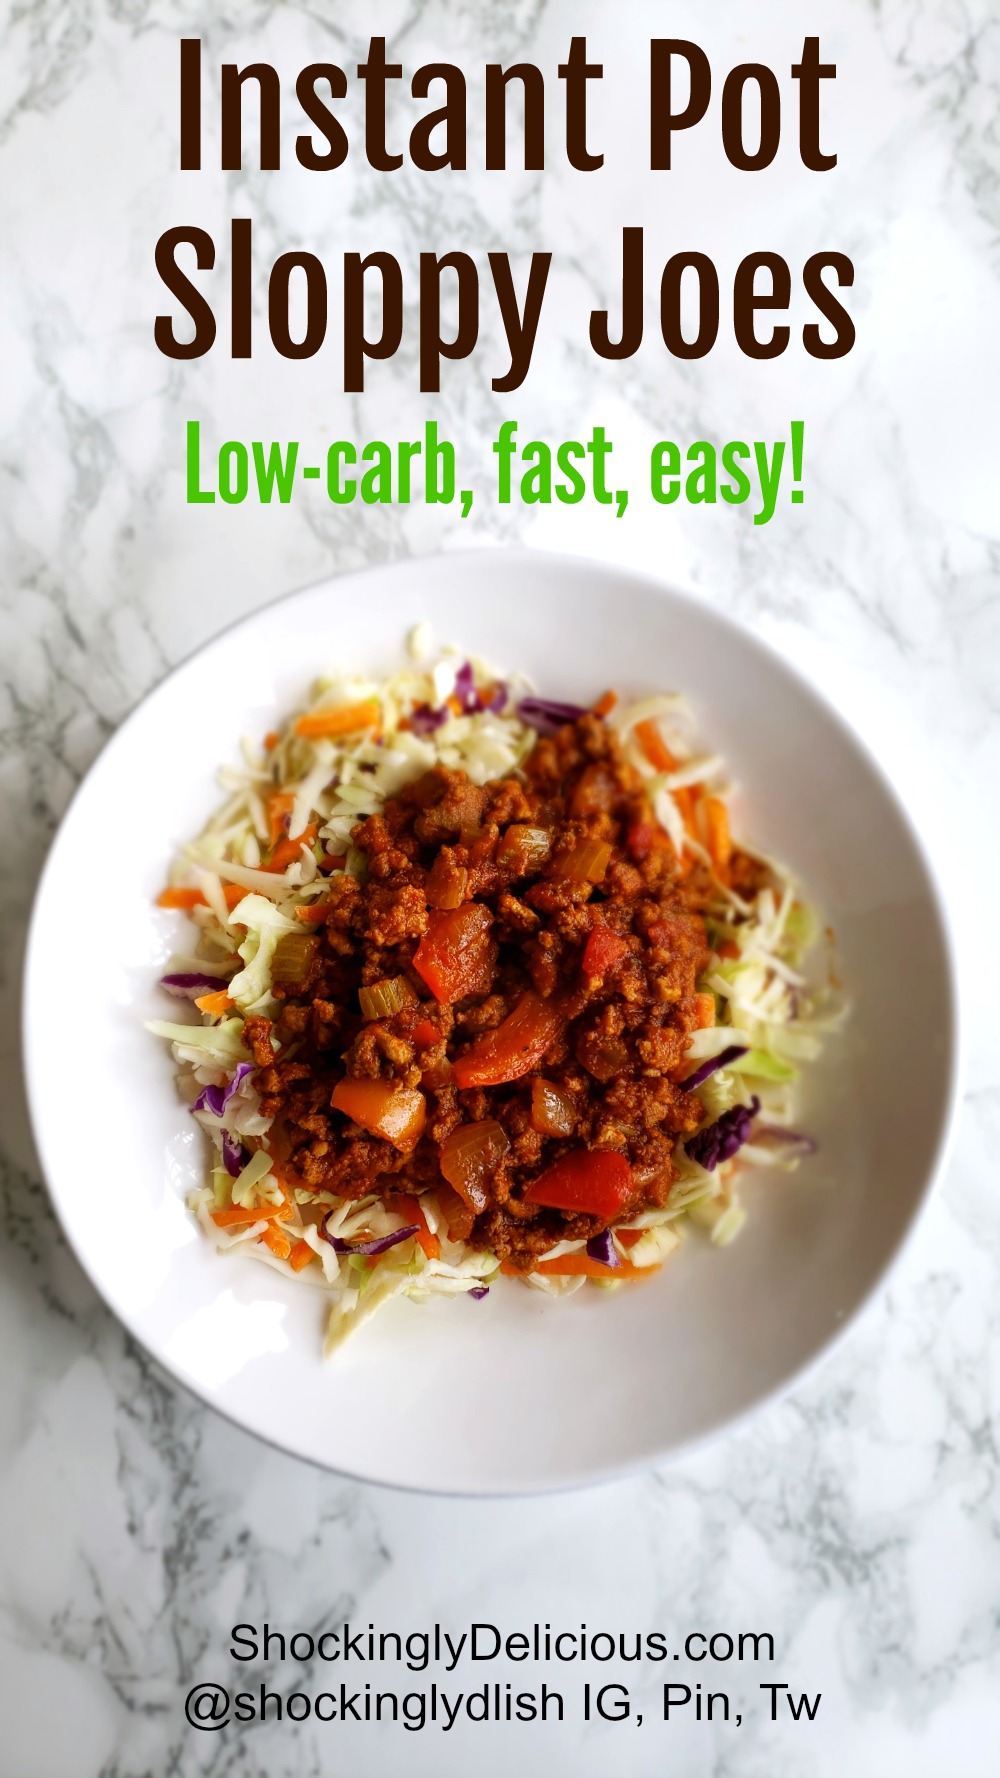 Sloppy Joes in the Instant Pot, served over shredded cabbage instead of on a bun. Presented on a white plate on ShockinglyDelicious.com